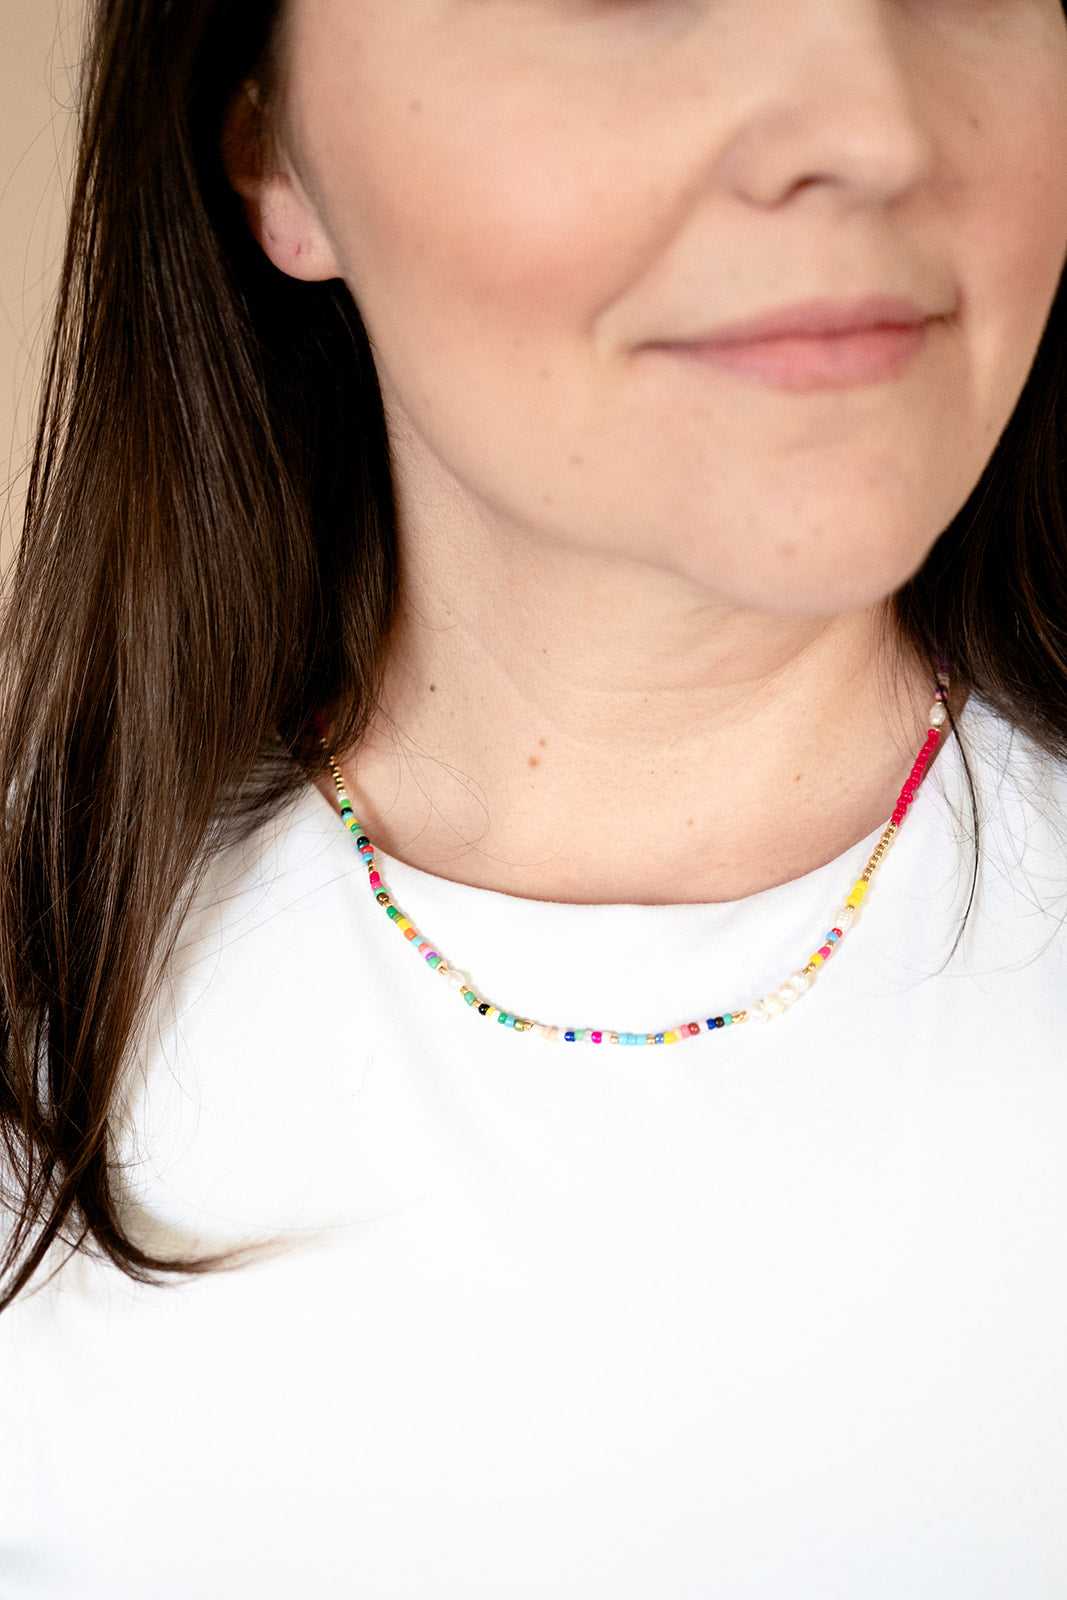 Freshwater Pearls with Colorful Beads Necklace